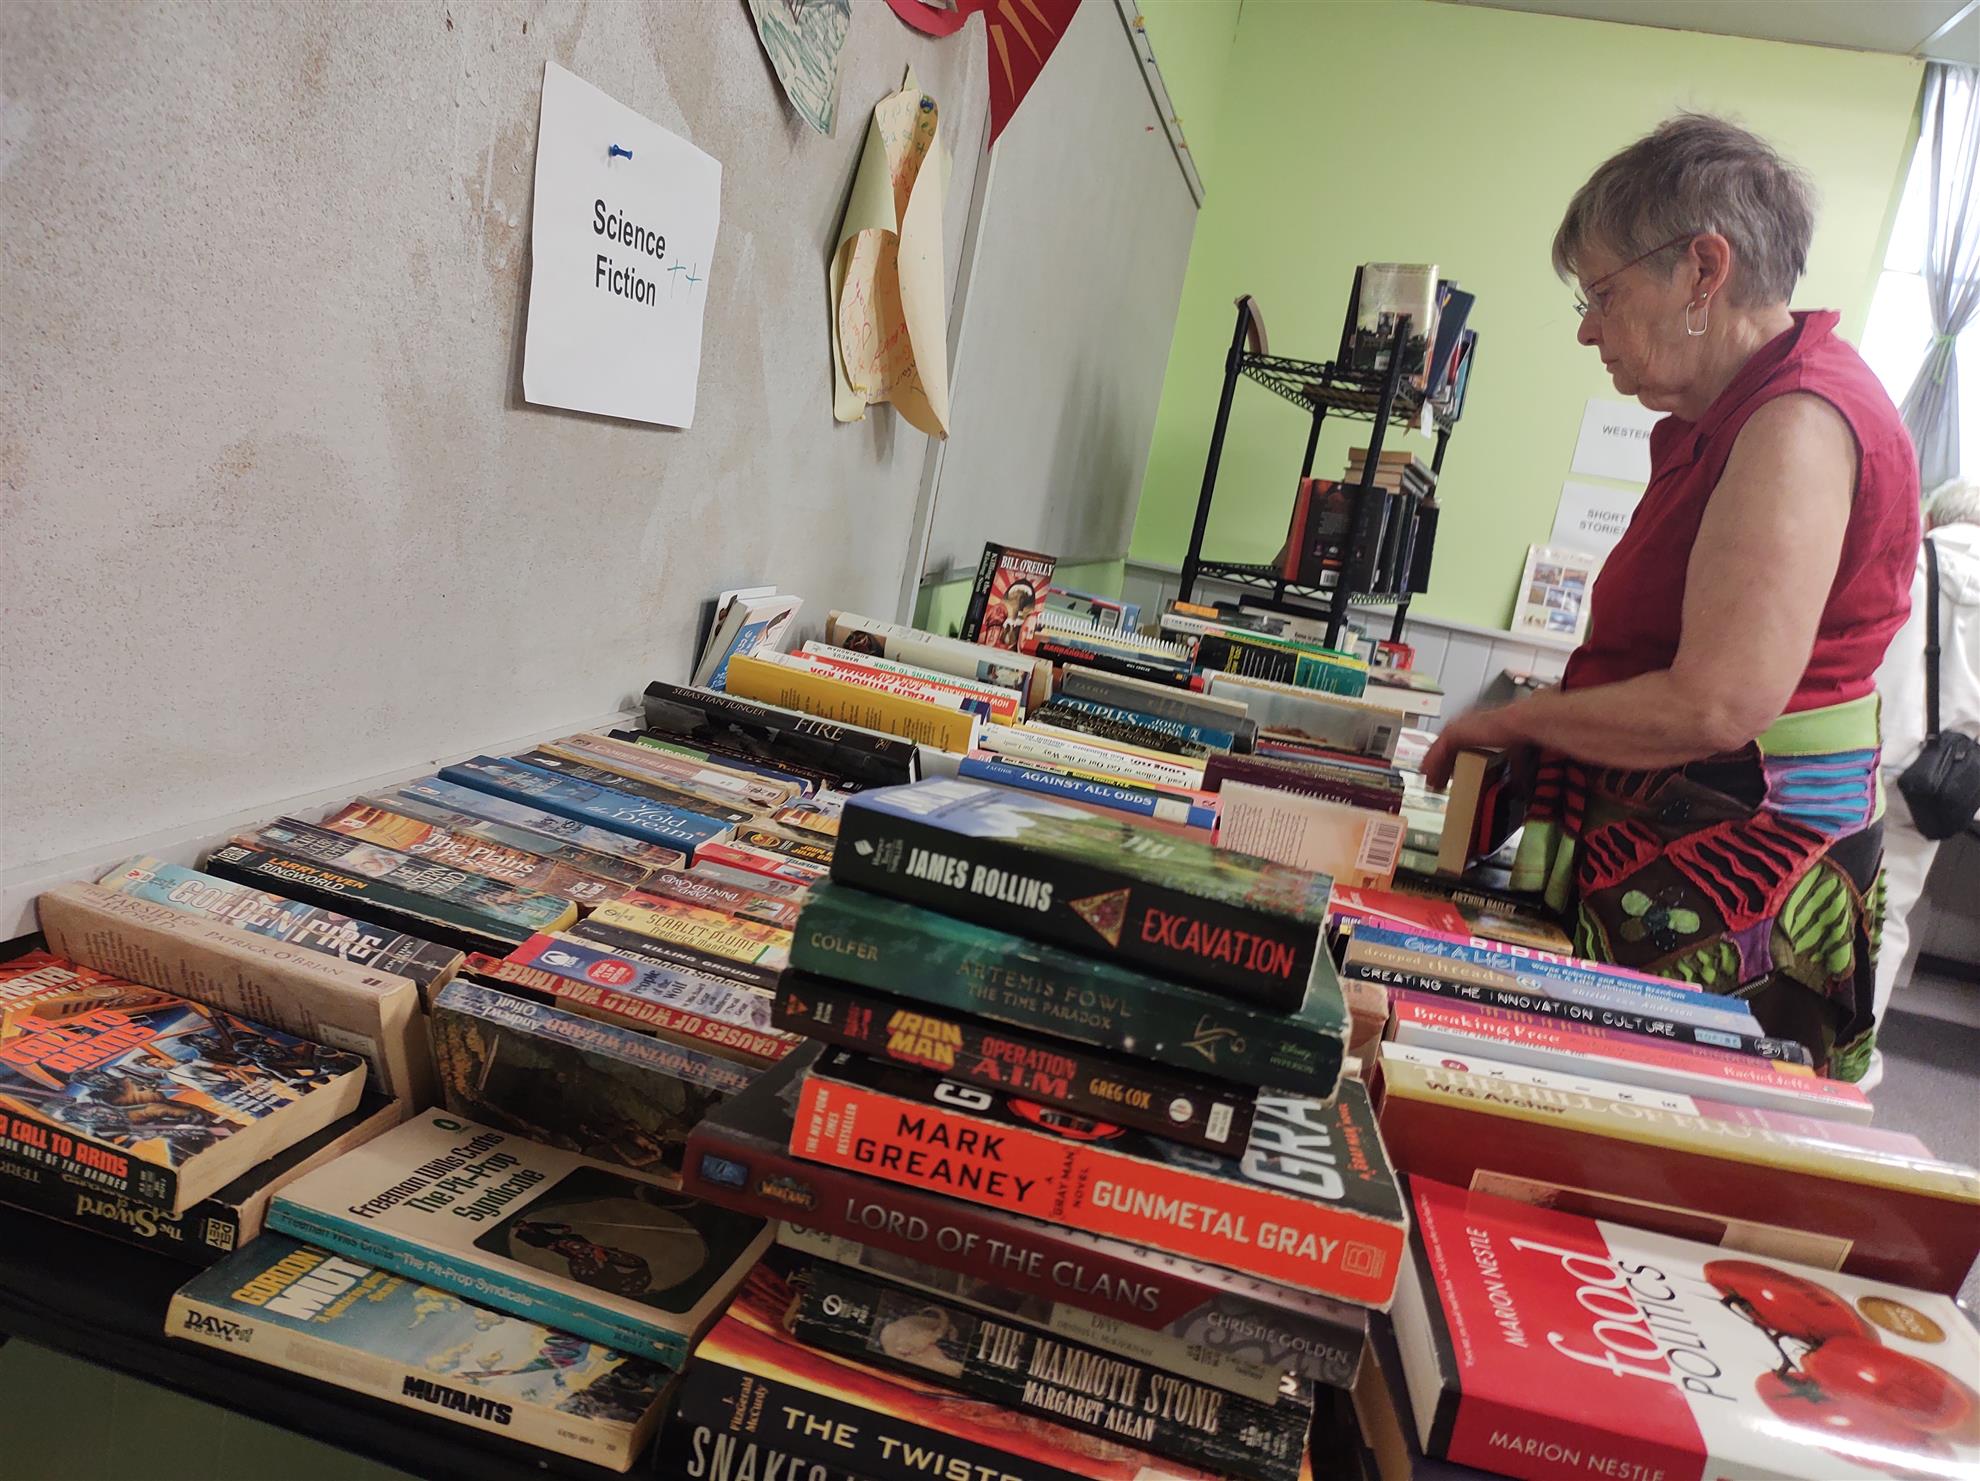 A shopper browses a table of used Sci-Fi books.